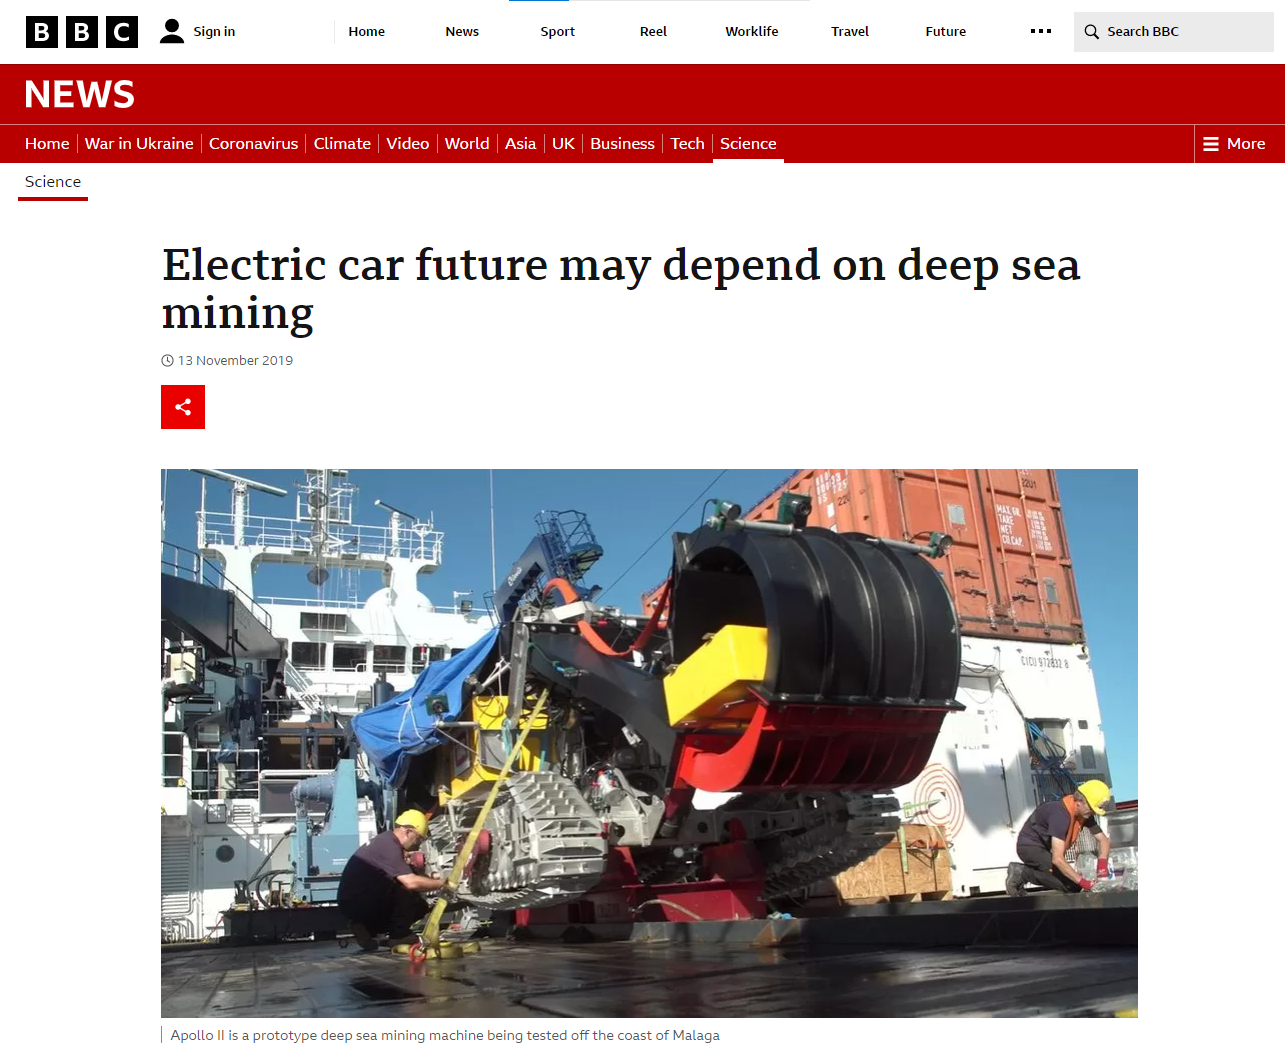 Well done! To build more EV batteries, we will soon be mining the ocean floor for minerals 02